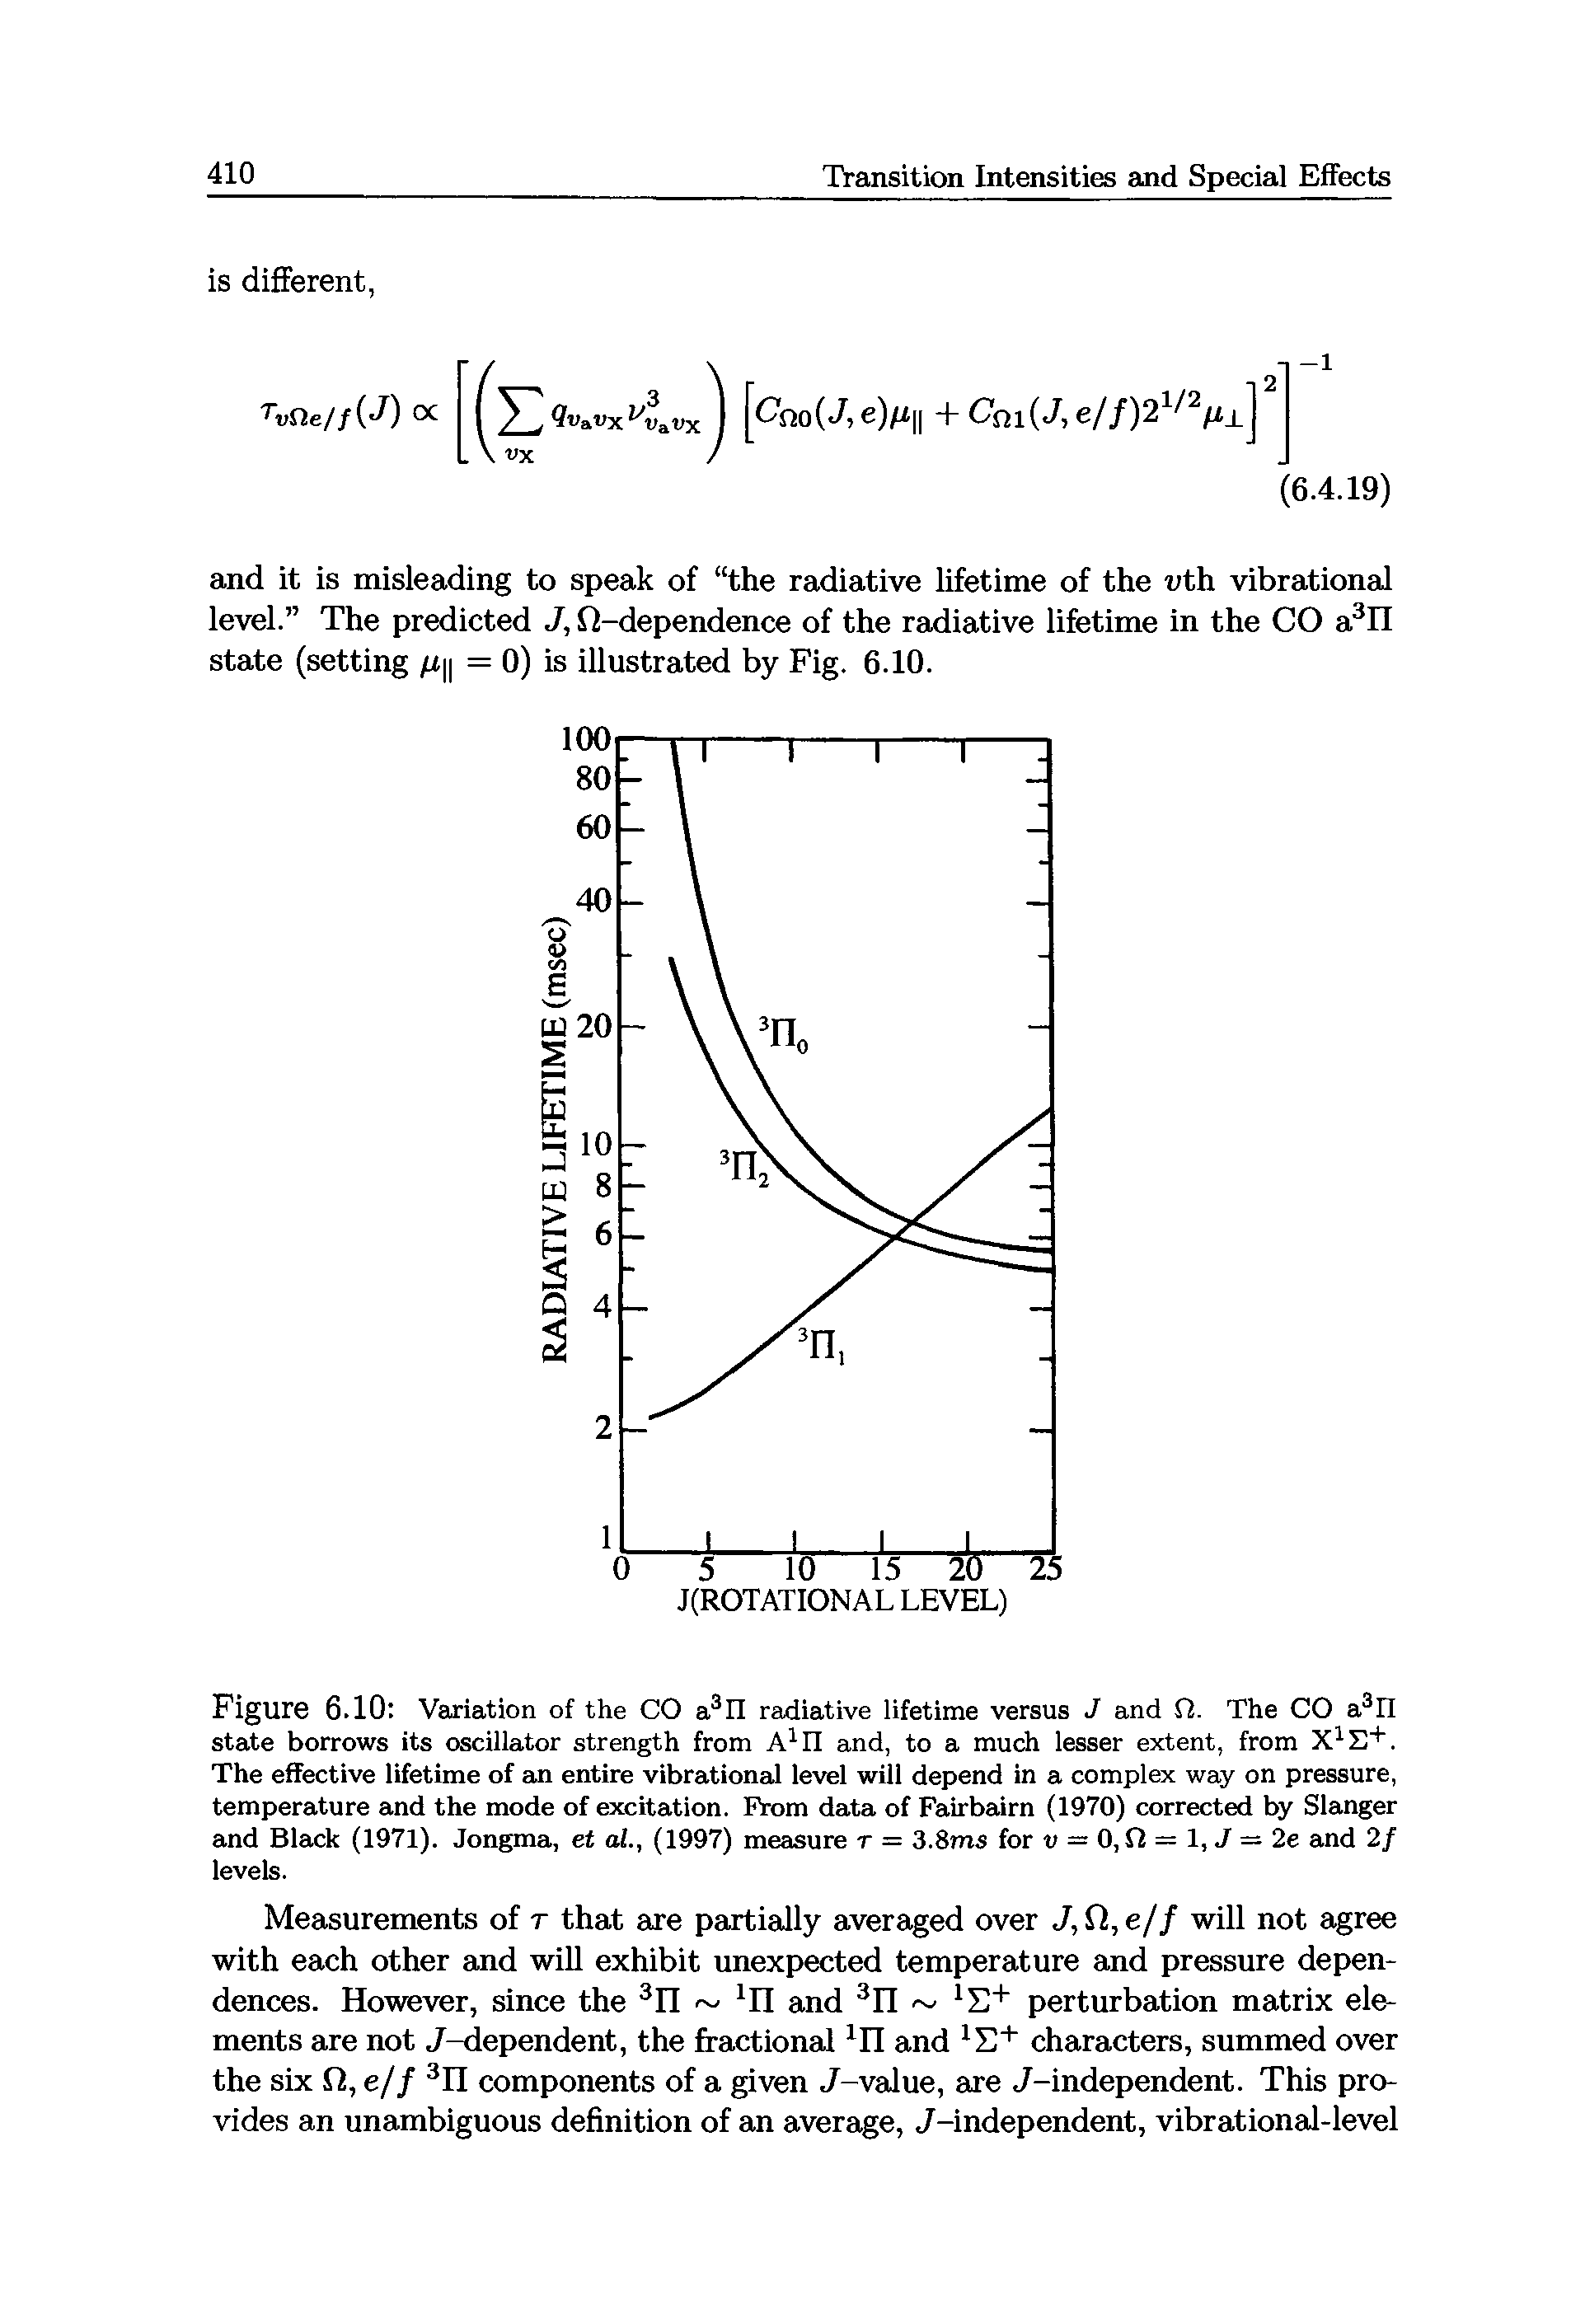 Figure 6.10 Variation of the CO a3n radiative lifetime versus J and Cl. The CO a3n state borrows its oscillator strength from A1 II and, to a much lesser extent, from X1E+. The effective lifetime of an entire vibrational level will depend in a complex way on pressure, temperature and the mode of excitation. From data of Fairbairn (1970) corrected by Slanger and Black (1971). Jongma, et al., (1997) measure r = 3.8ms for v = 0, Cl = 1, J = 2e and 2/ levels.